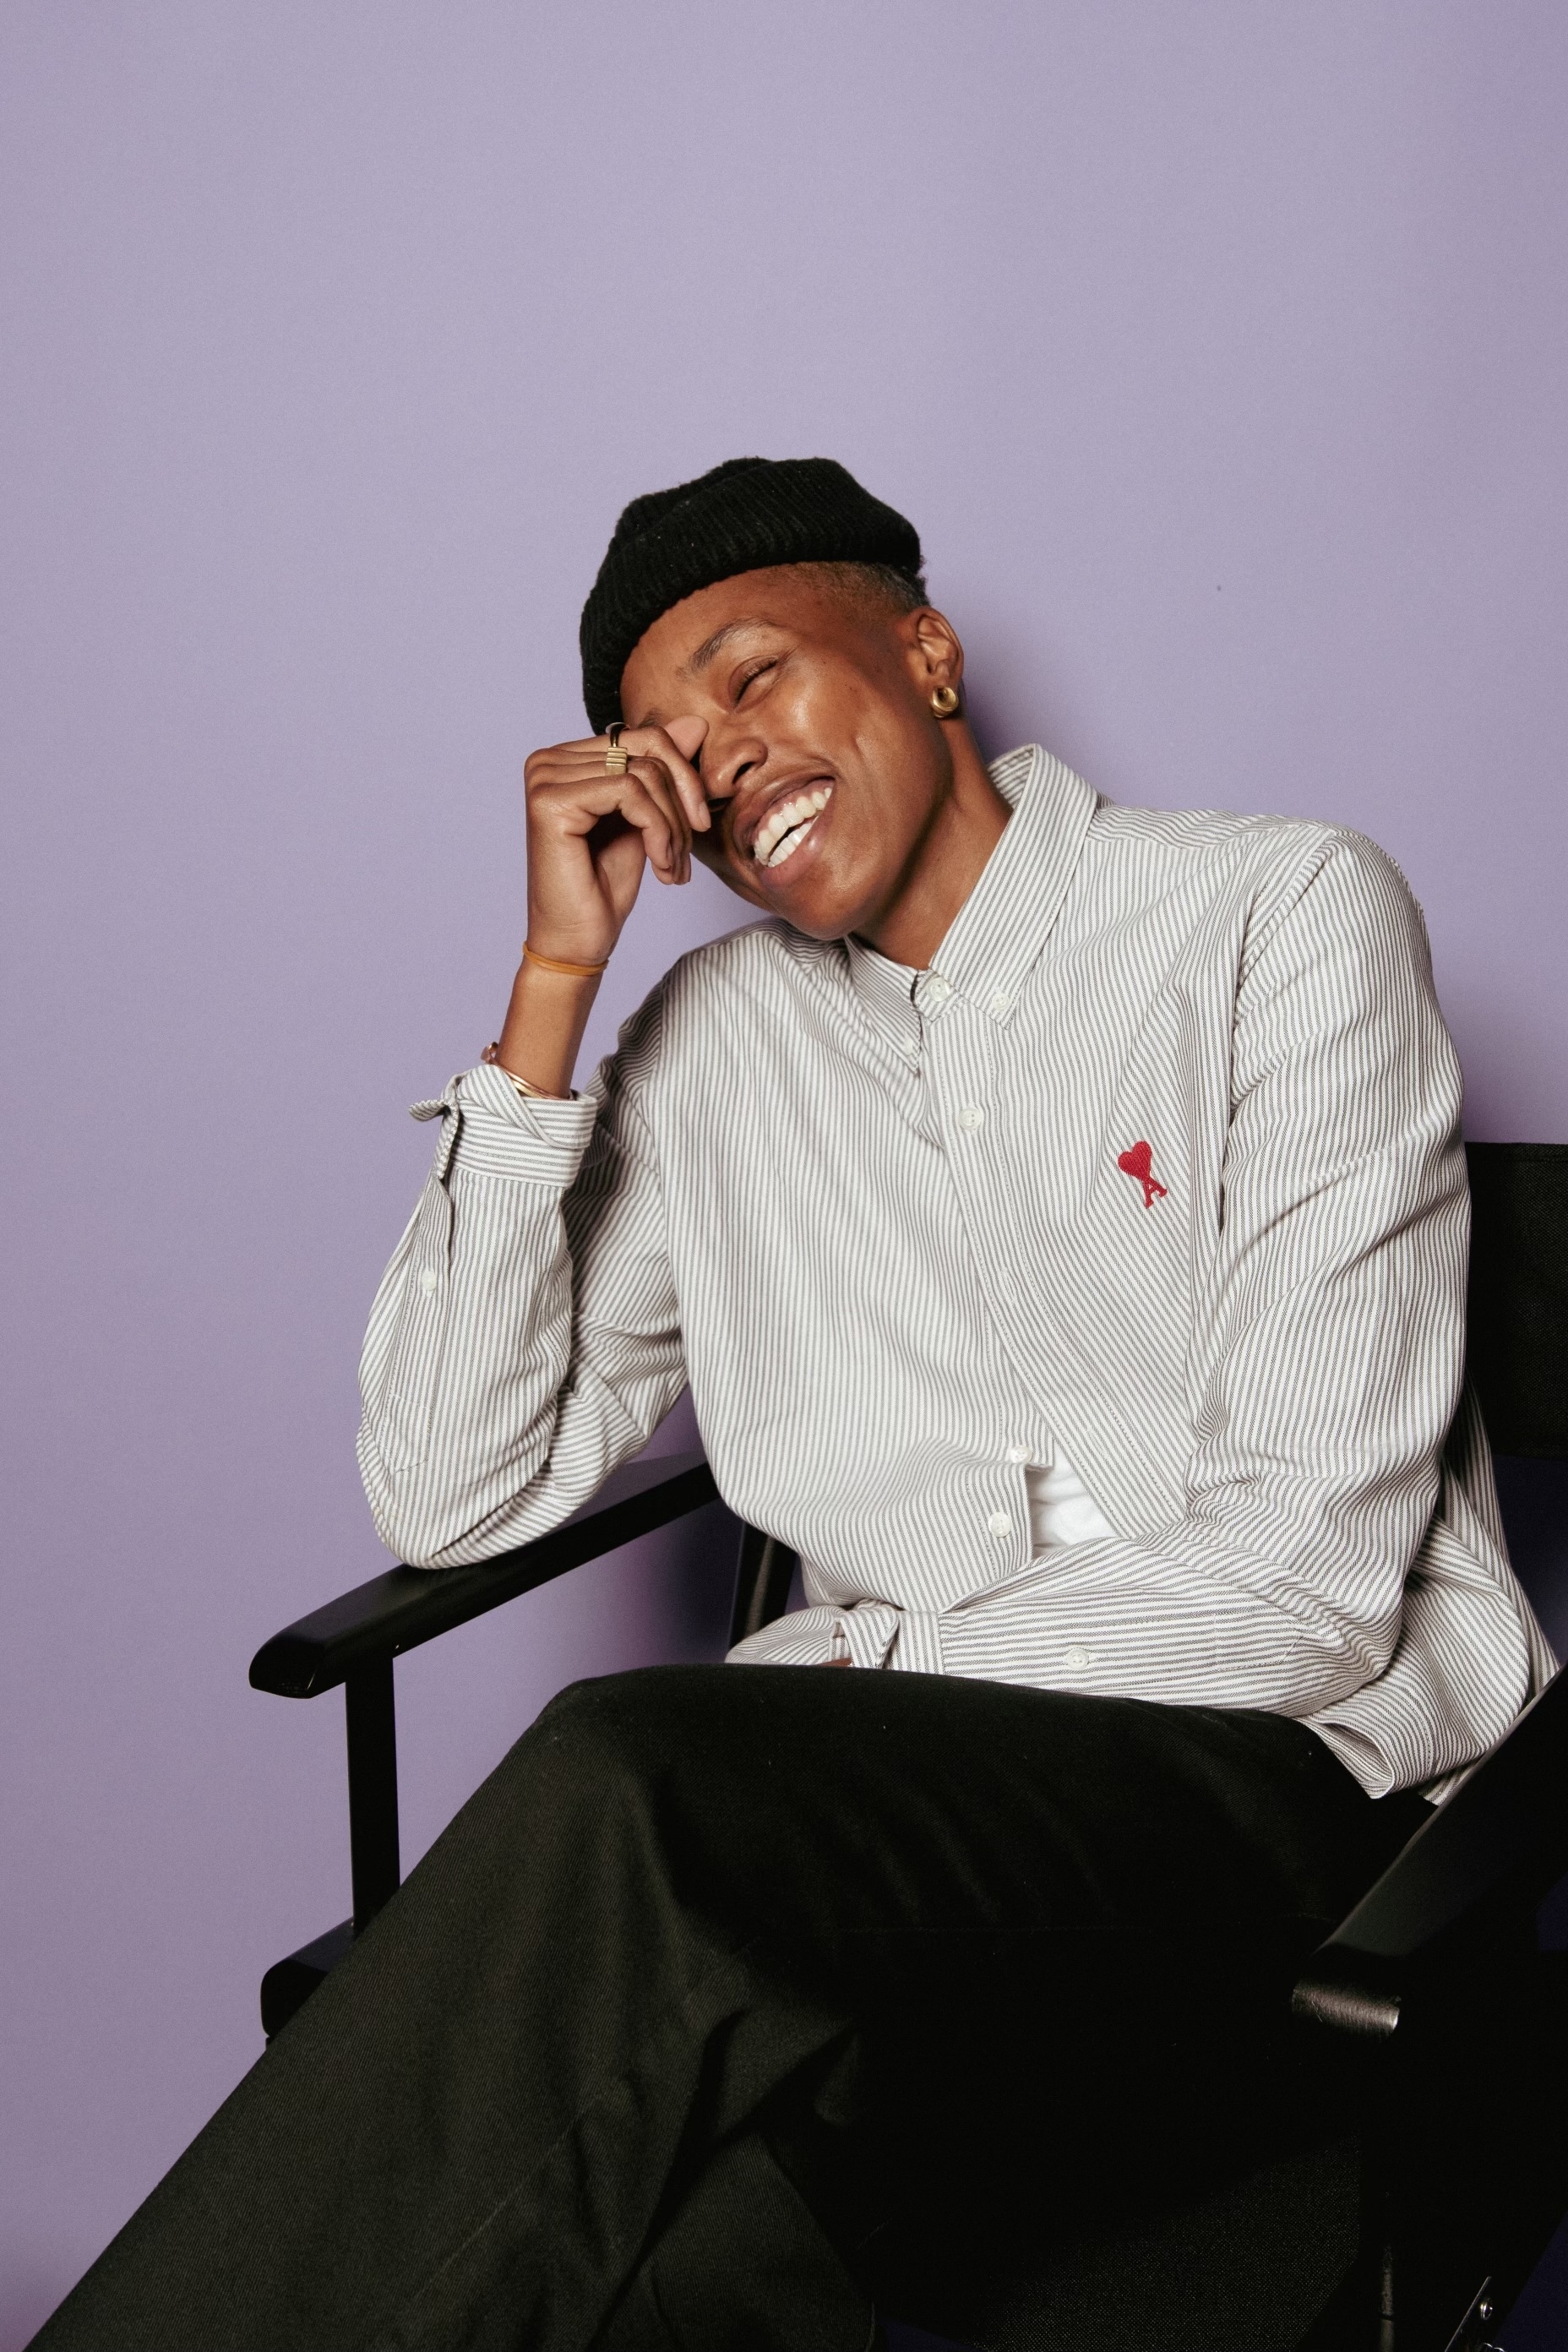 Mal Wright smiling, seated in a chair, wearing a beanie and striped shirt